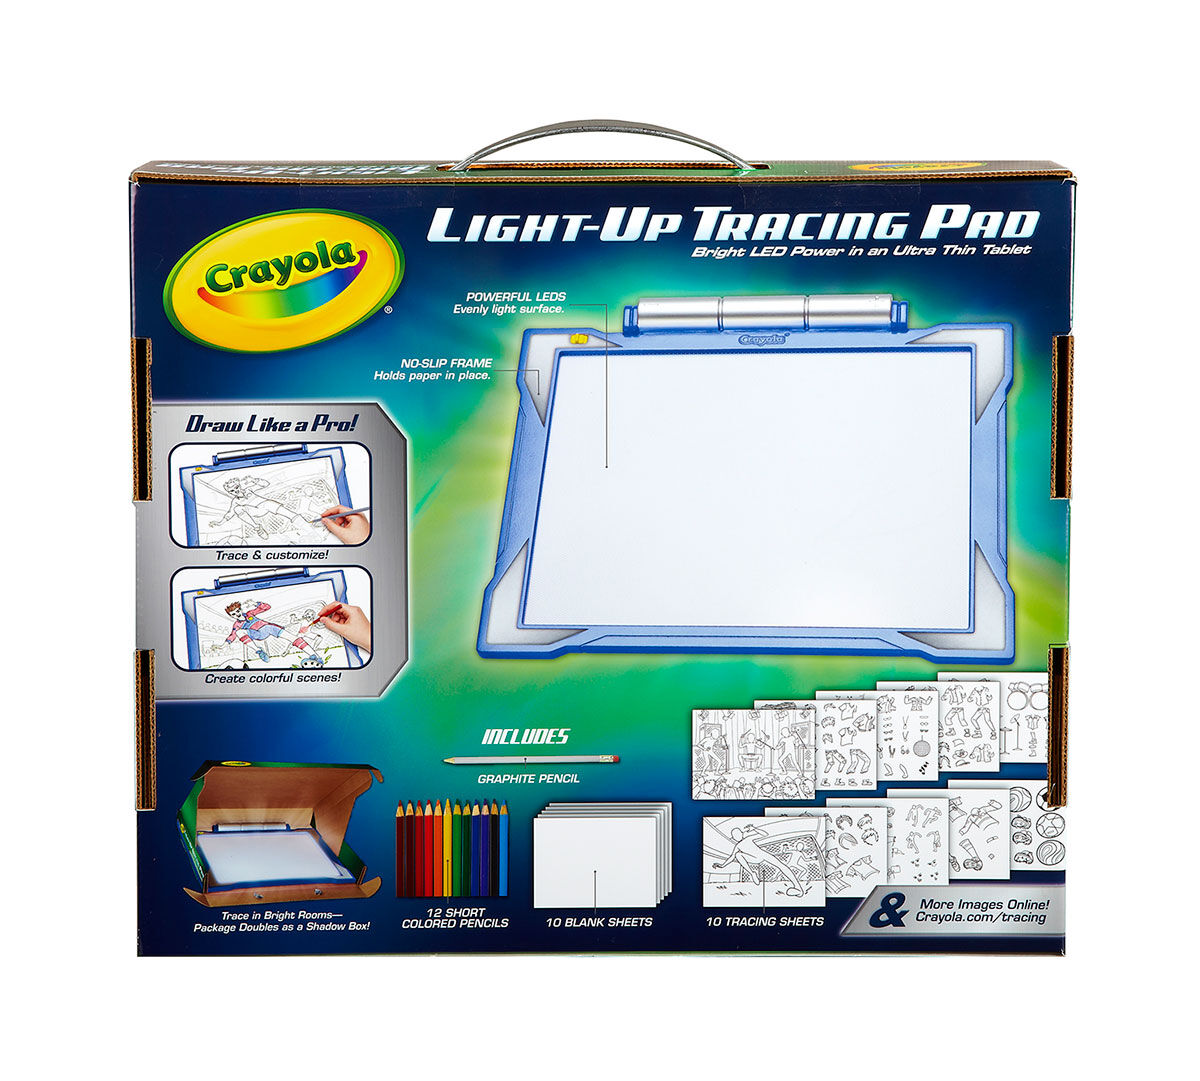 crayola-light-up-tracing-pad-blue-art-tool-bright-leds-easy-tracing-with-1-pencil-12